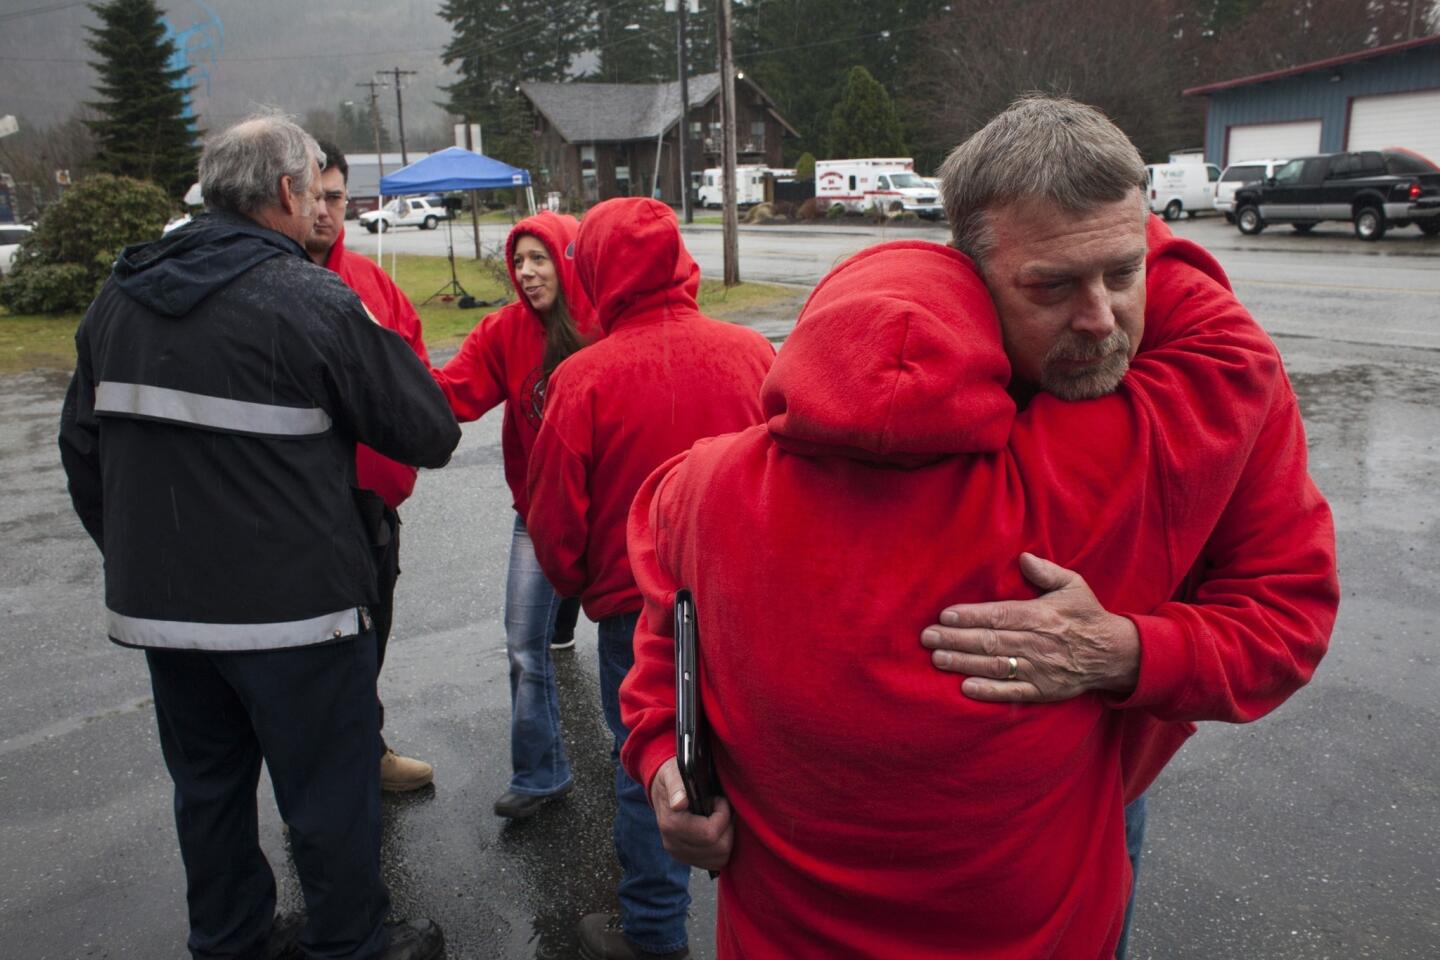 Snoqualmie Indian tribe members Toby Strotz, right, and his sister, Chris Strotz Jacobs, embrace in Darrington, Wash., after the tribe announced a donation of $275,000 for mudslide relief efforts, including for local fire departments, the Red Cross, and others. Fire District 24 Chief Dennis Fenstermaker, left, thanks members of the tribe for the donation.